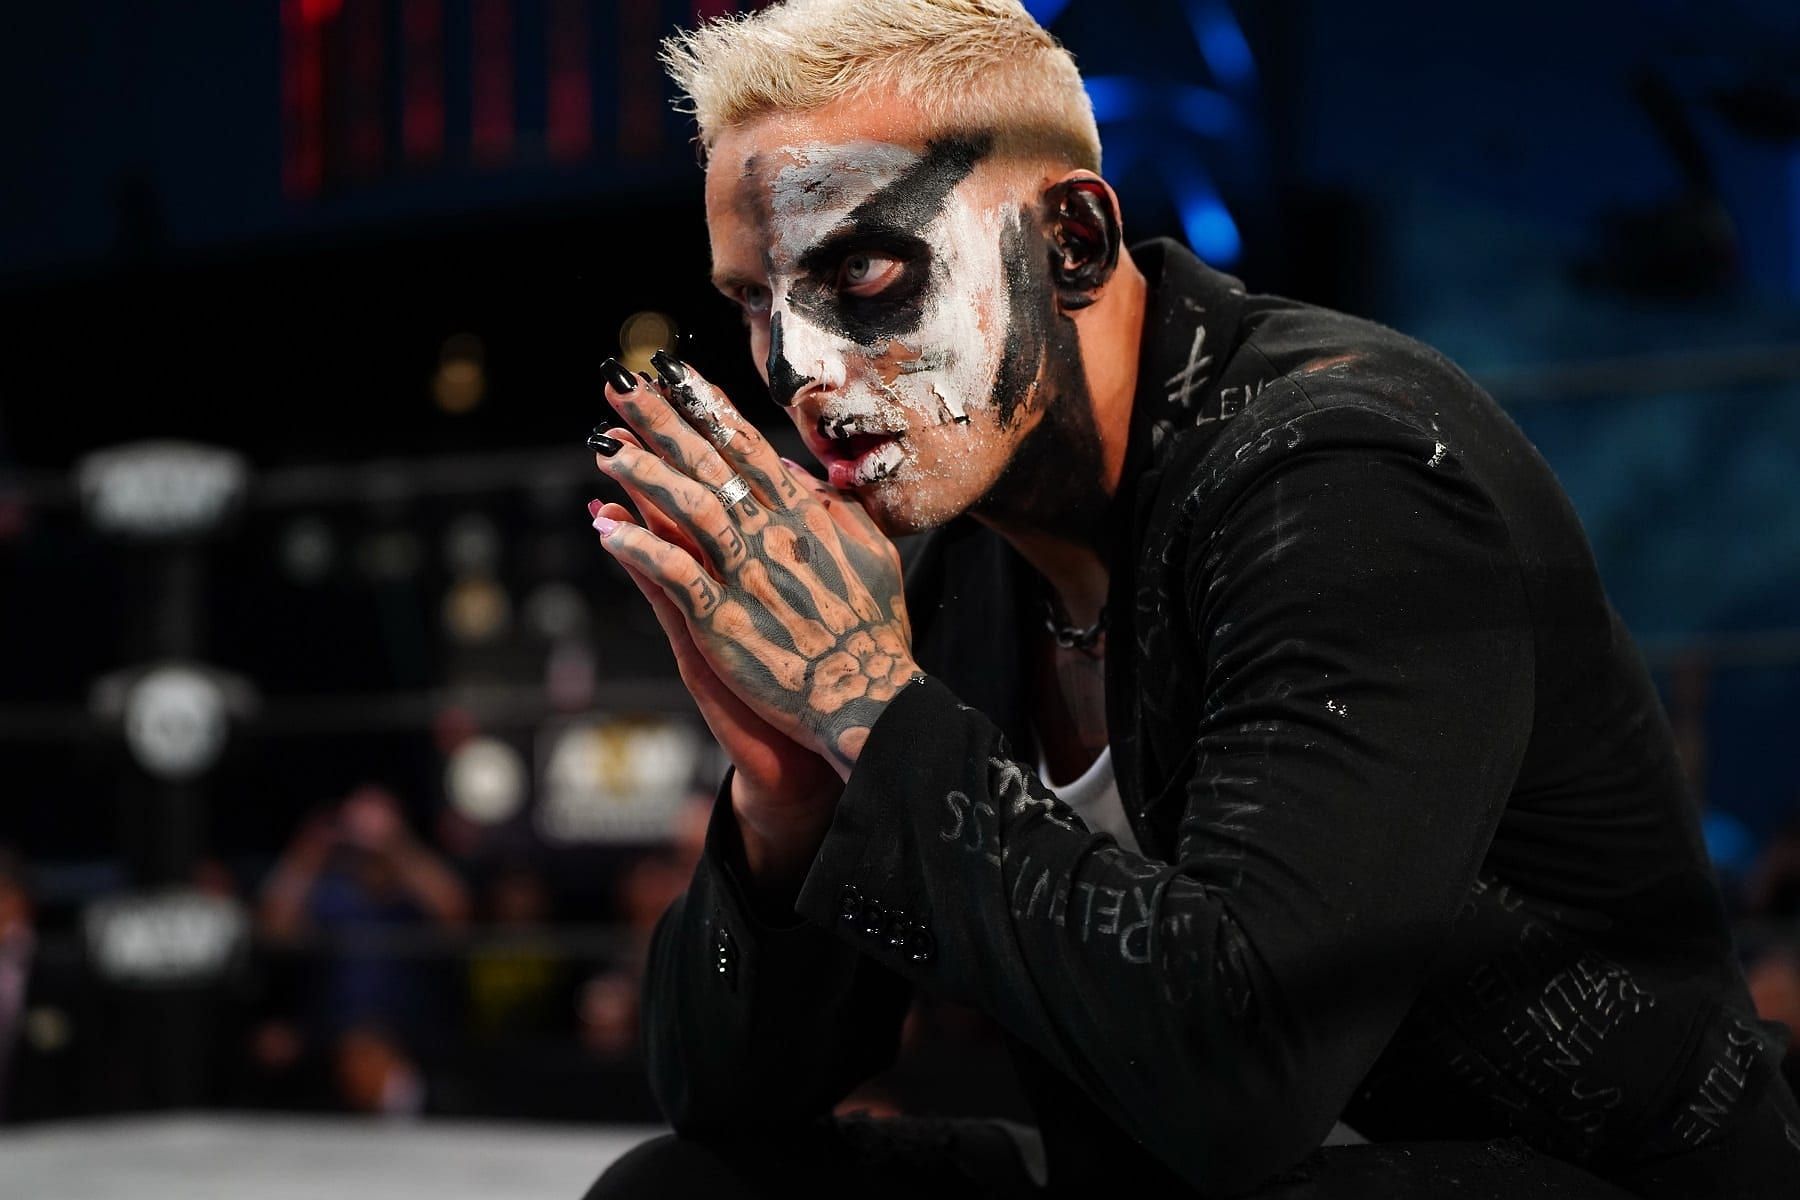 Darby Allin is known for his high-risk style